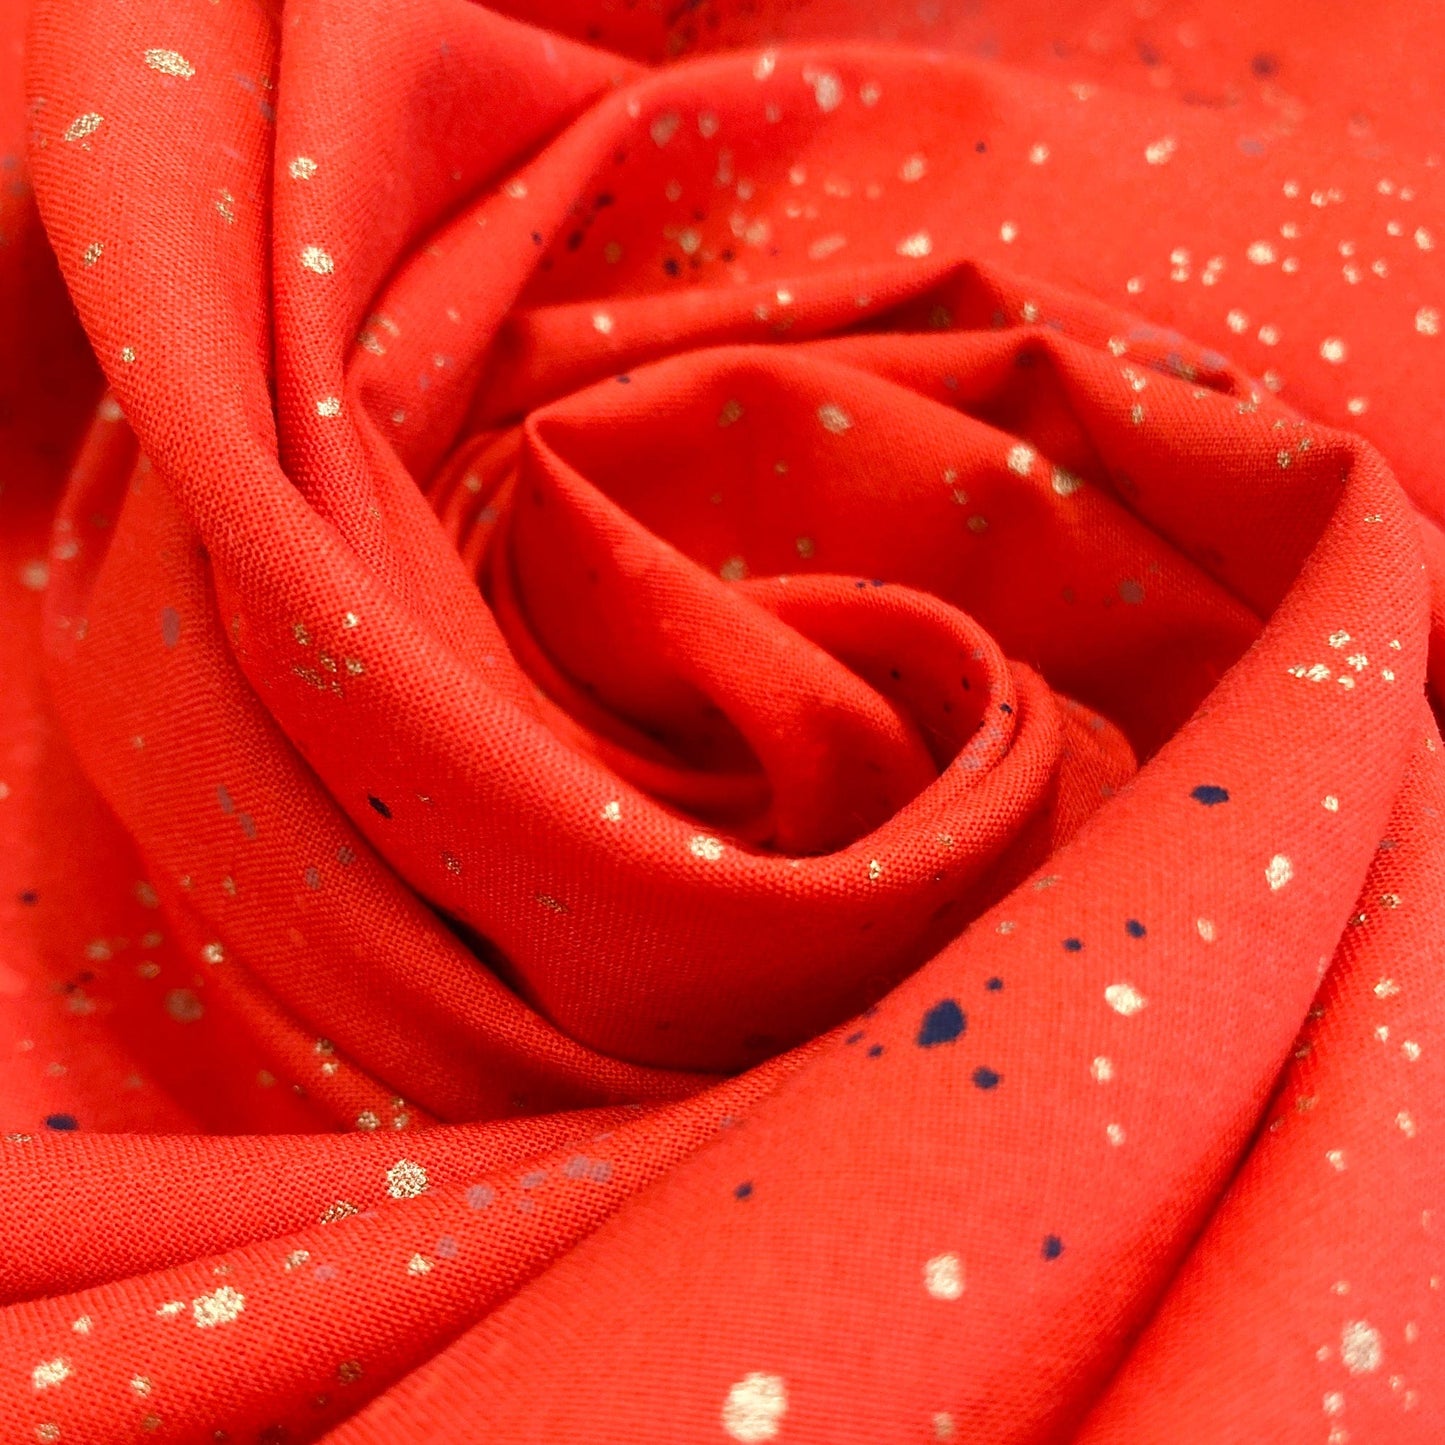 Ruby Star Society 'Speckled' Quilting Cotton in 'Poinsettia' (Metallic)